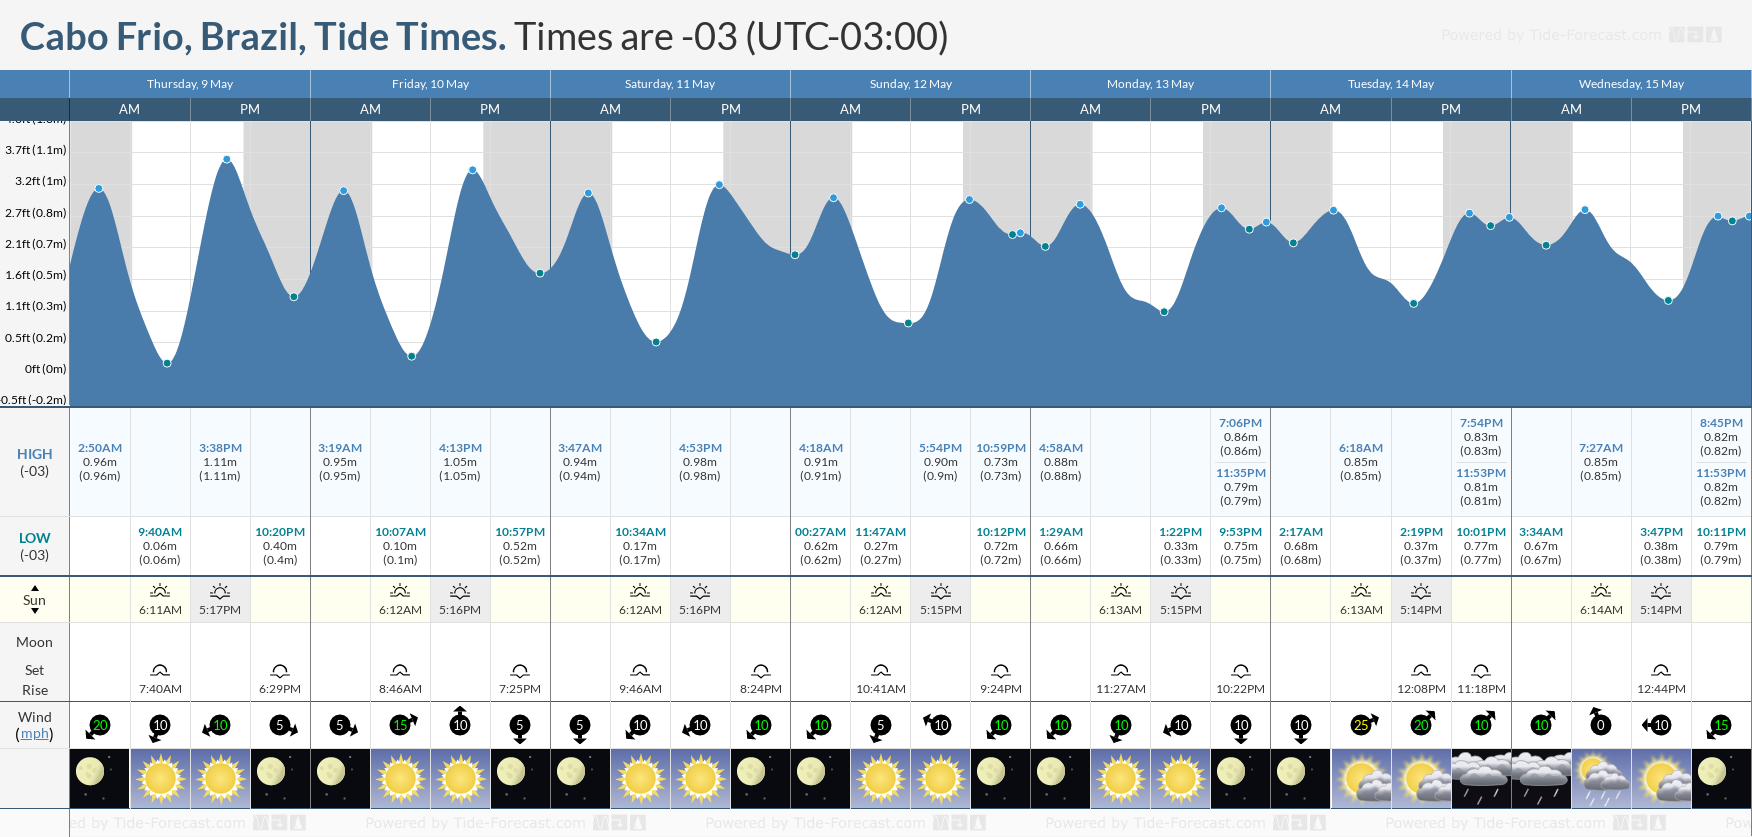 Cabo Frio, Brazil Tide Chart including high and low tide tide times for the next 7 days